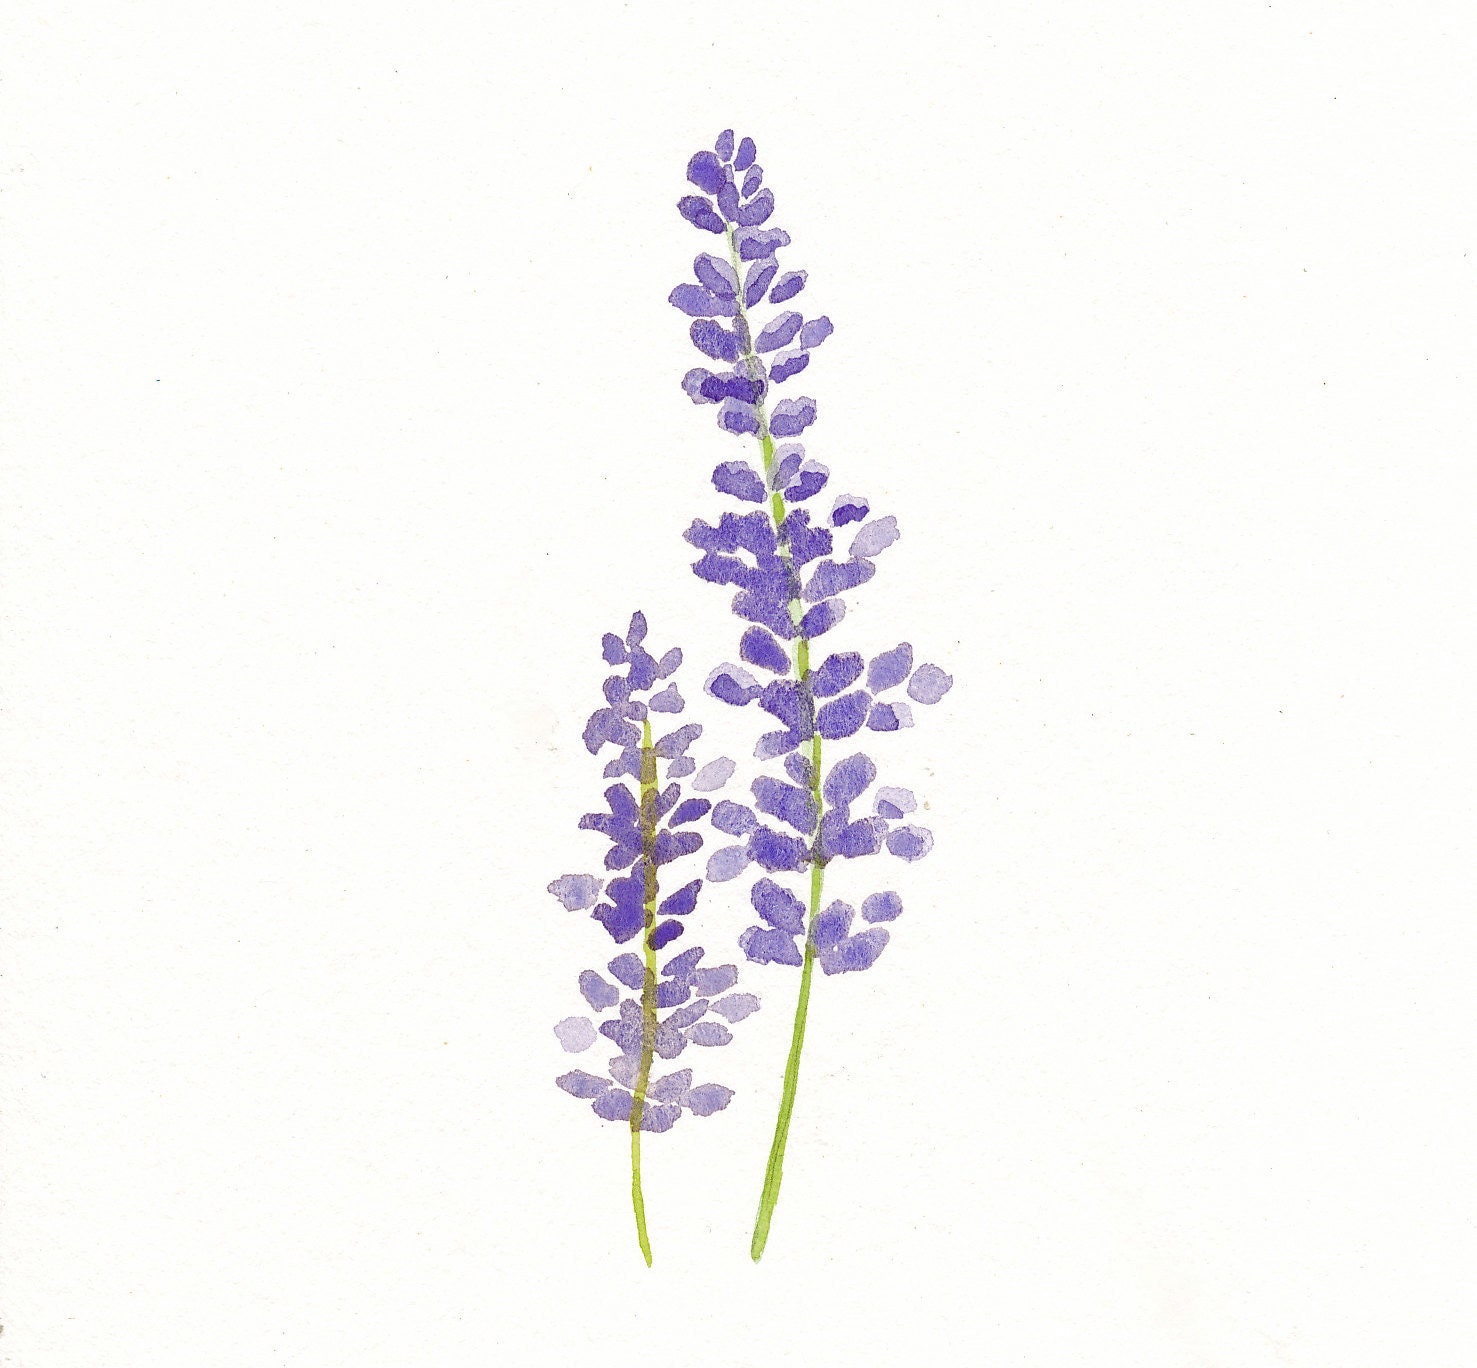 Lavender Original Watercolor Painting by TreeHollowDesigns